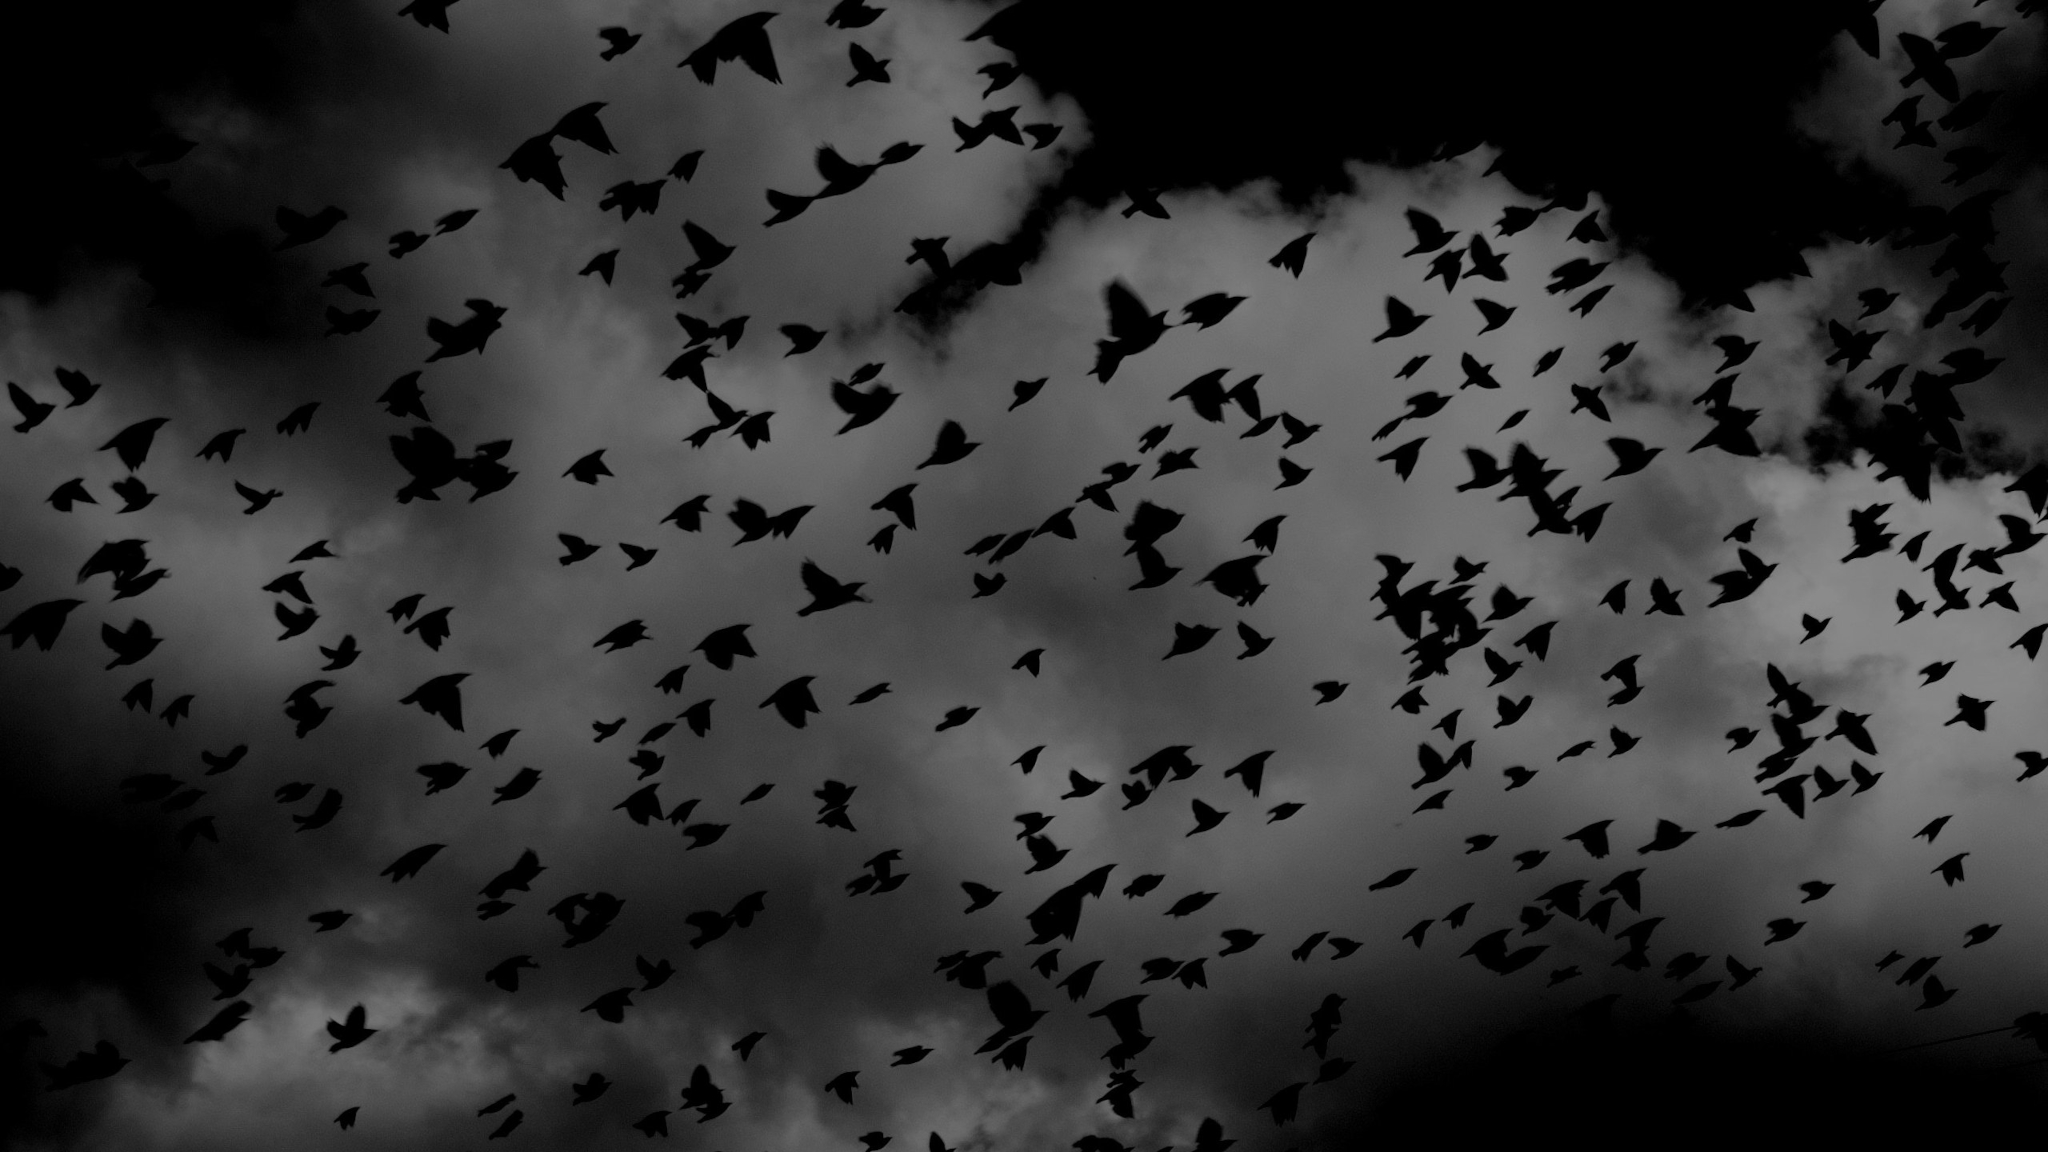 General 2048x1152 crow birds nature silhouette flying clouds monochrome